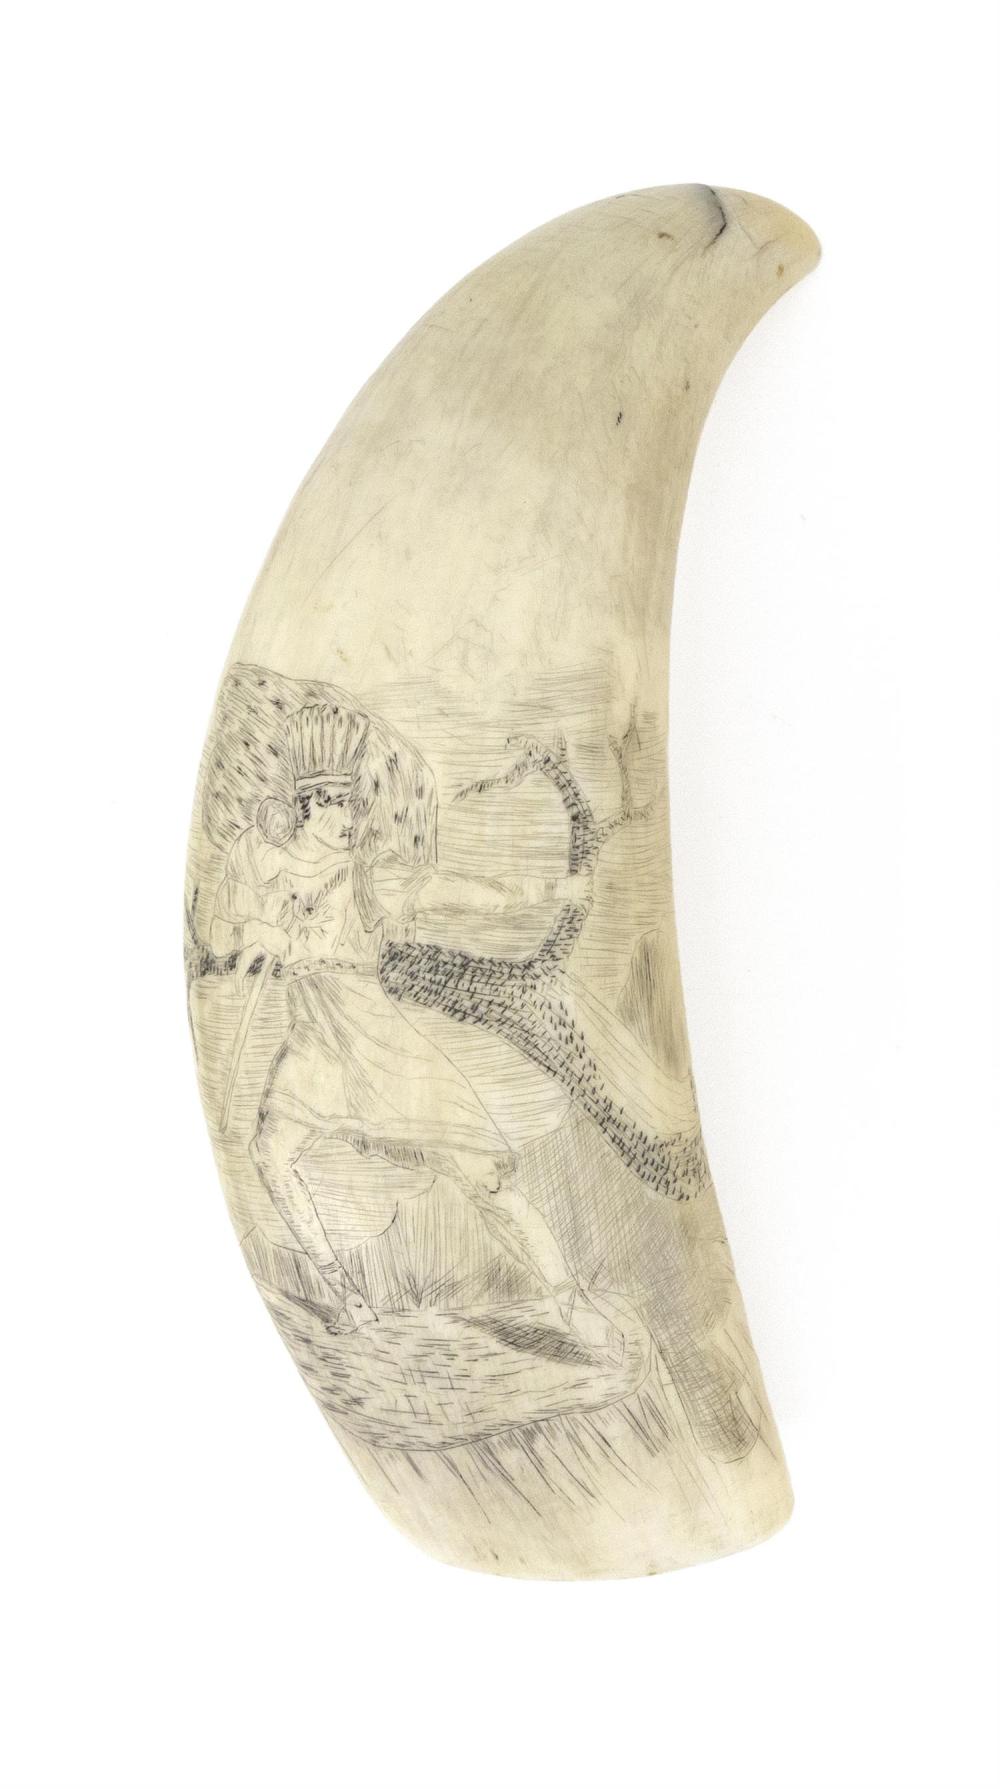 SCRIMSHAW WHALE S TOOTH DEPICTING 34c654